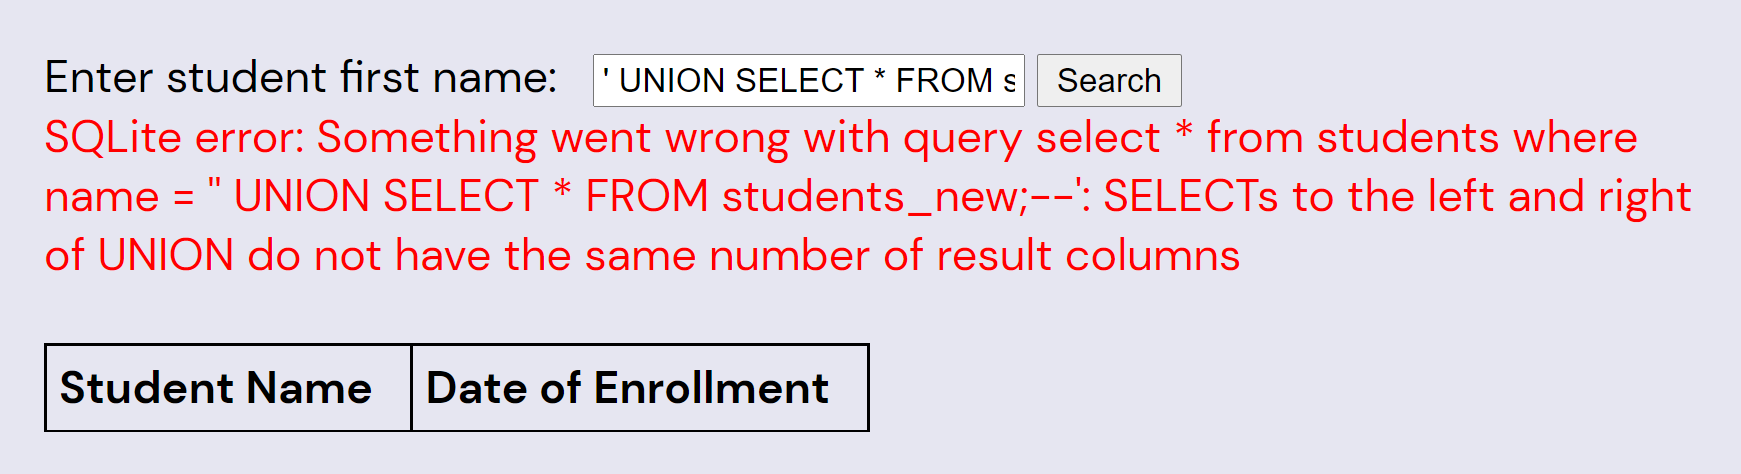 Screenshot showing error: SQLite error: Something went wrong with query select * from students where name = '' UNION SELECT * FROM students_new;--': SELECTs to the left and right of UNION do not have the same number of result columns